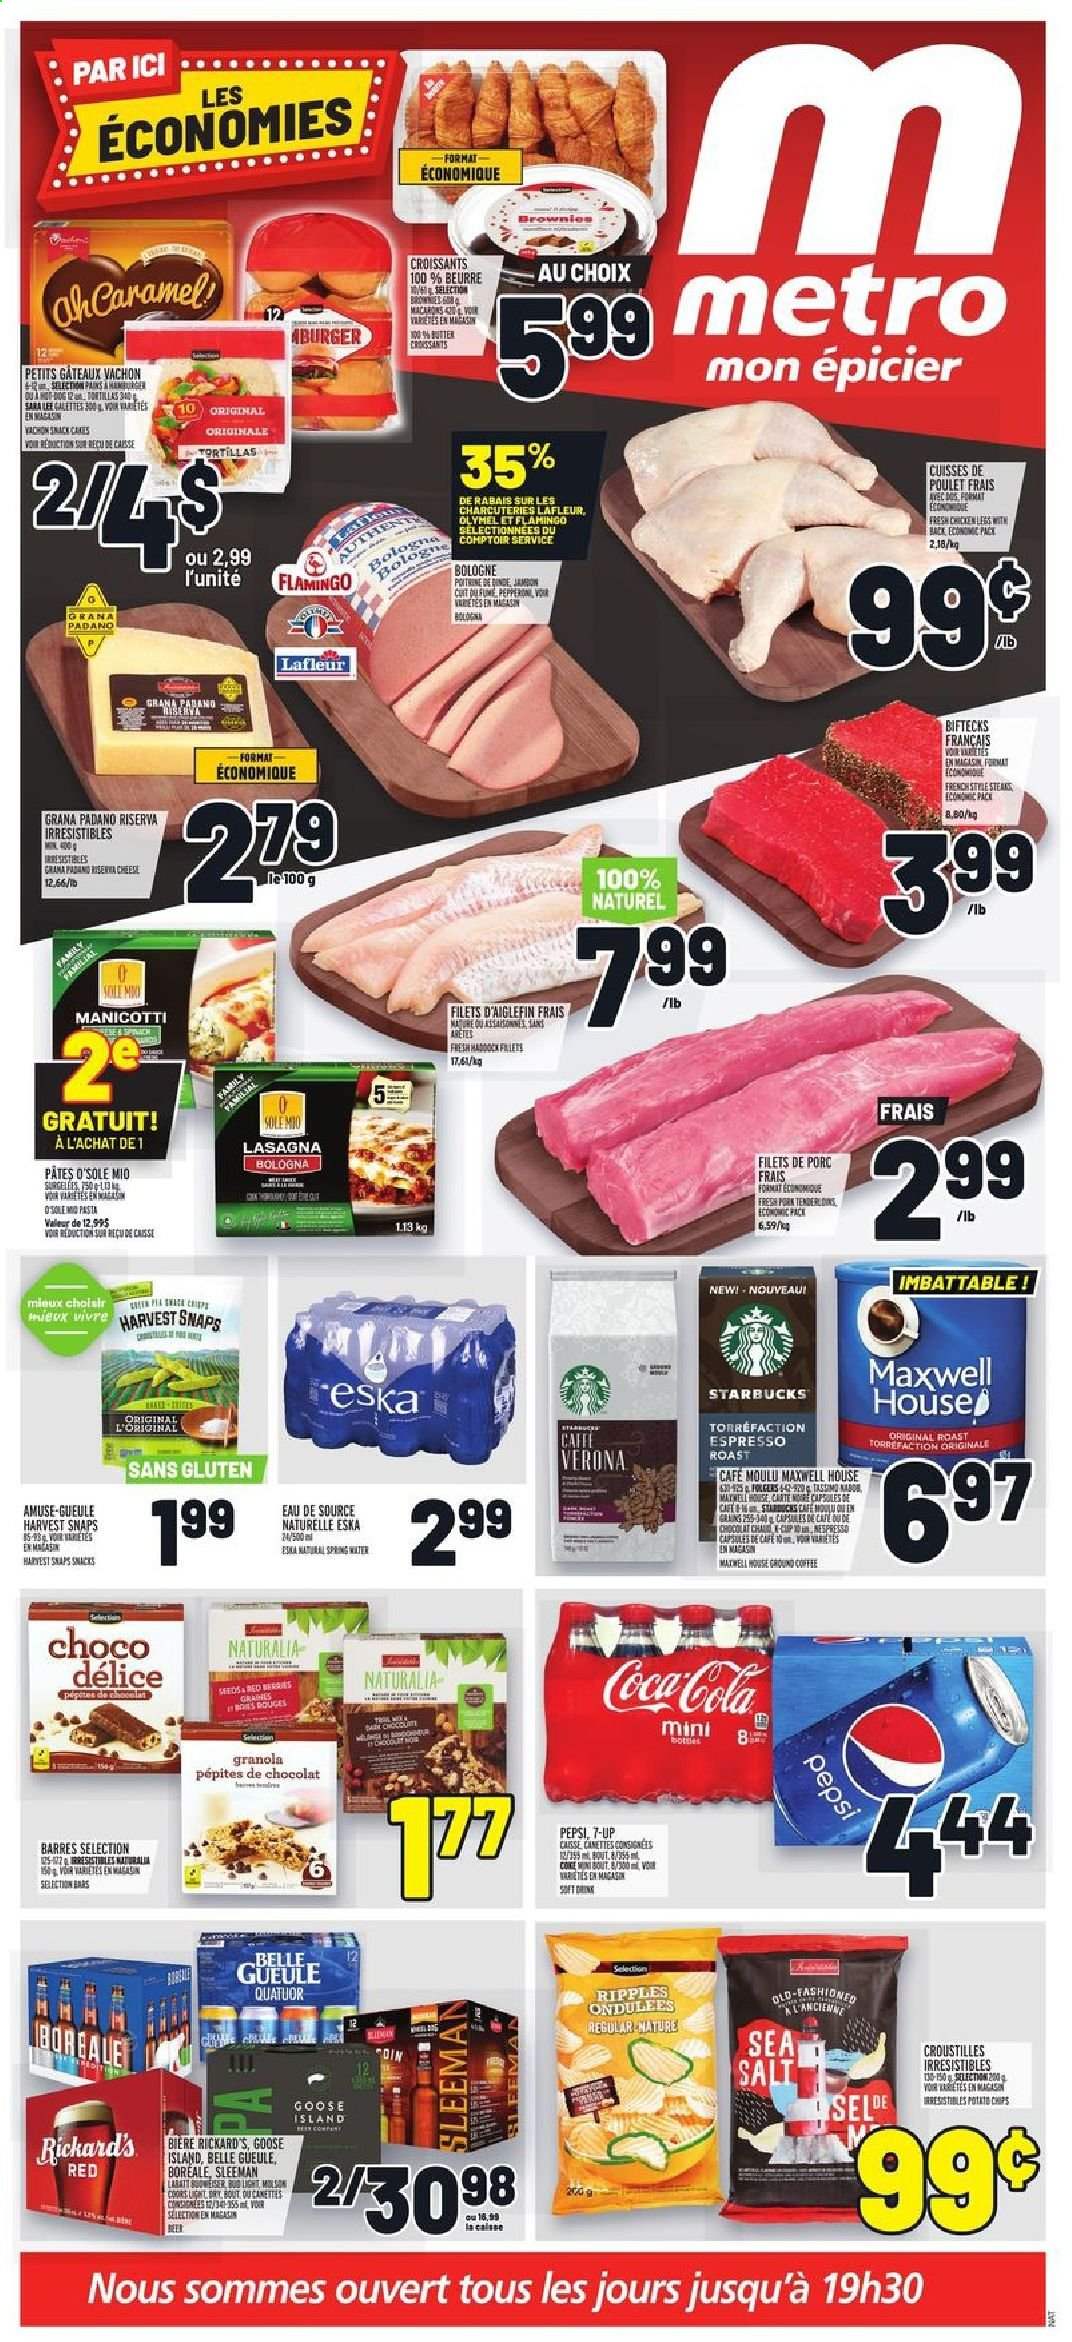 thumbnail - Metro Flyer - January 28, 2021 - February 03, 2021 - Sales products - tortillas, croissant, Sara Lee, spinach, haddock, pasta, lasagna meal, bologna sausage, cheese, Grana Padano, snack, Harvest Snaps, caramel, Coca-Cola, Pepsi, 7UP, Maxwell House, Starbucks, beer, chicken legs, chicken, pork tenderloin, granola, chips, Coors. Page 1.